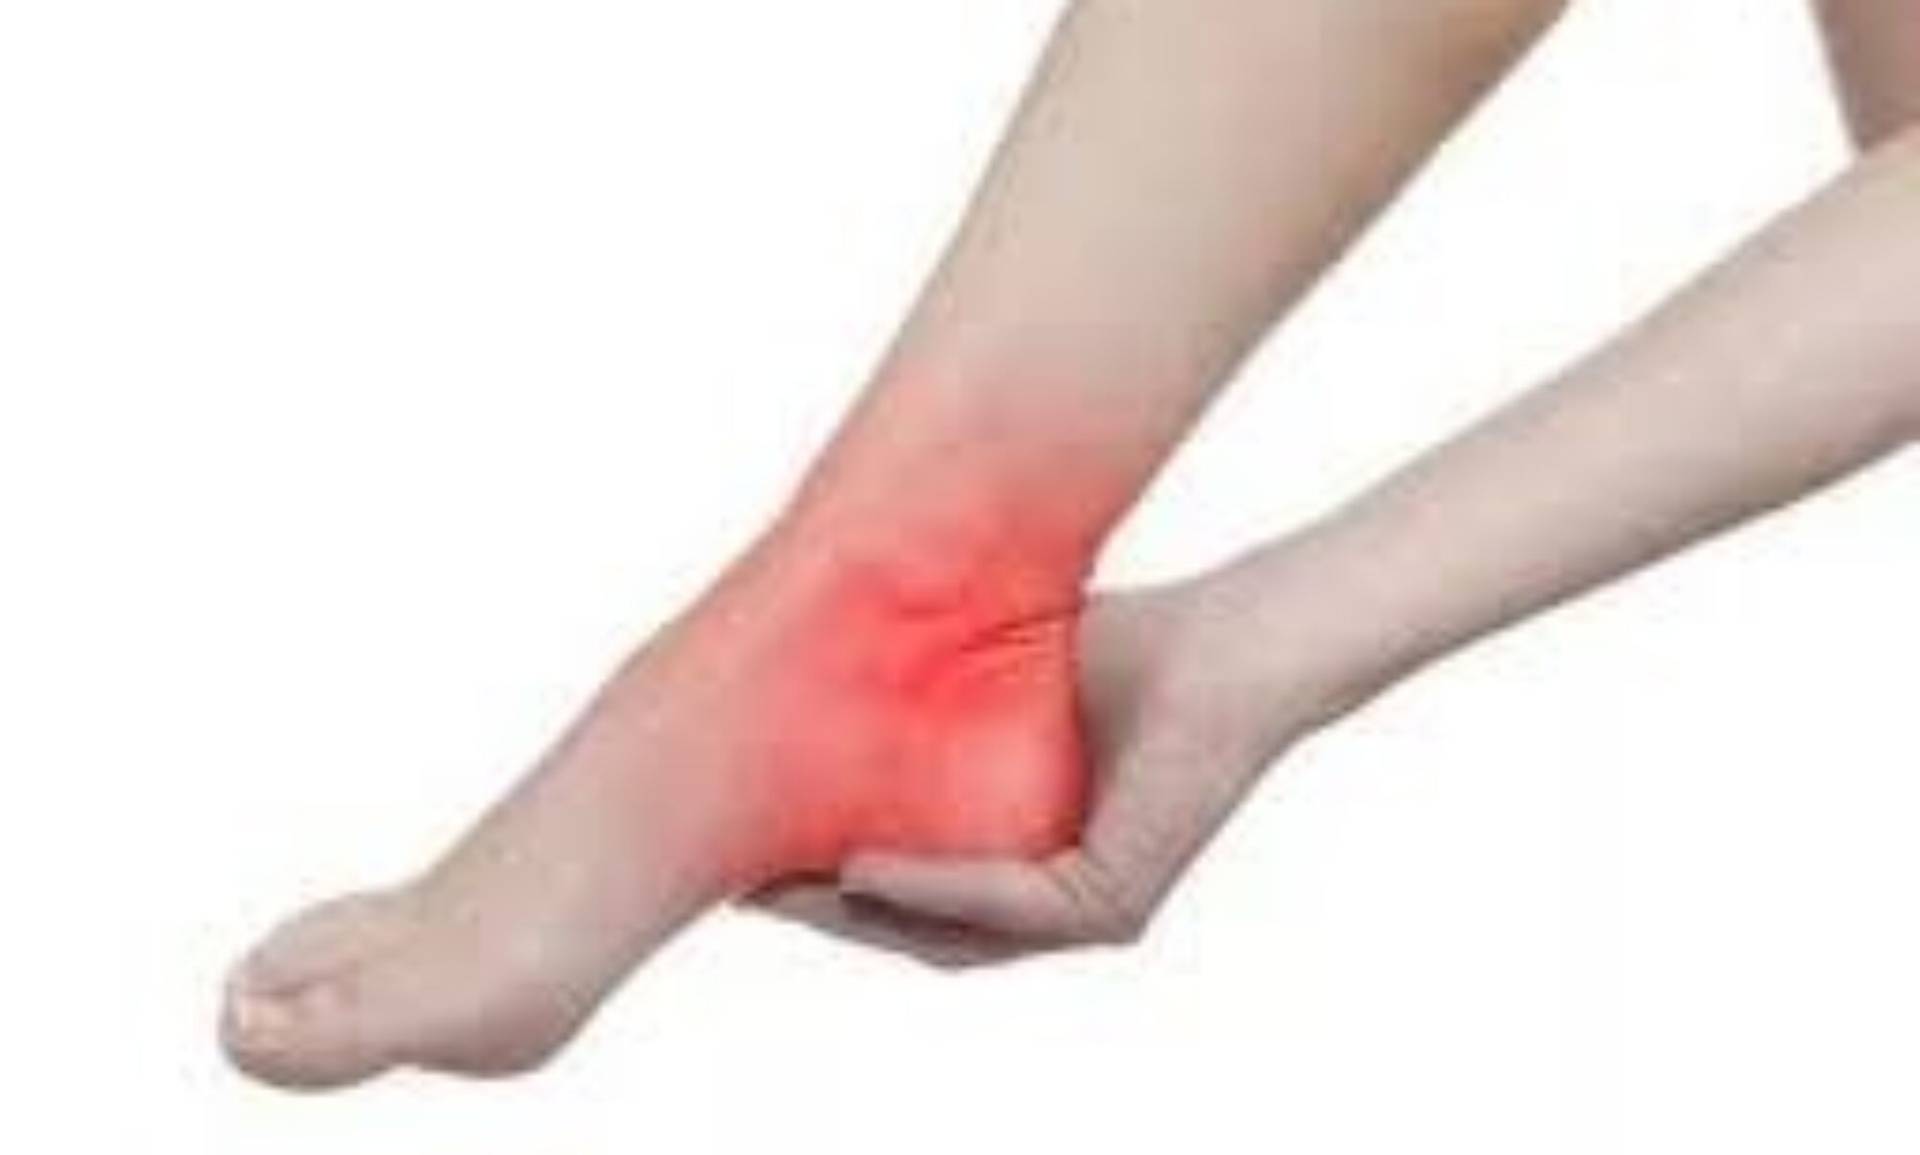 Acupuncture for foot pain